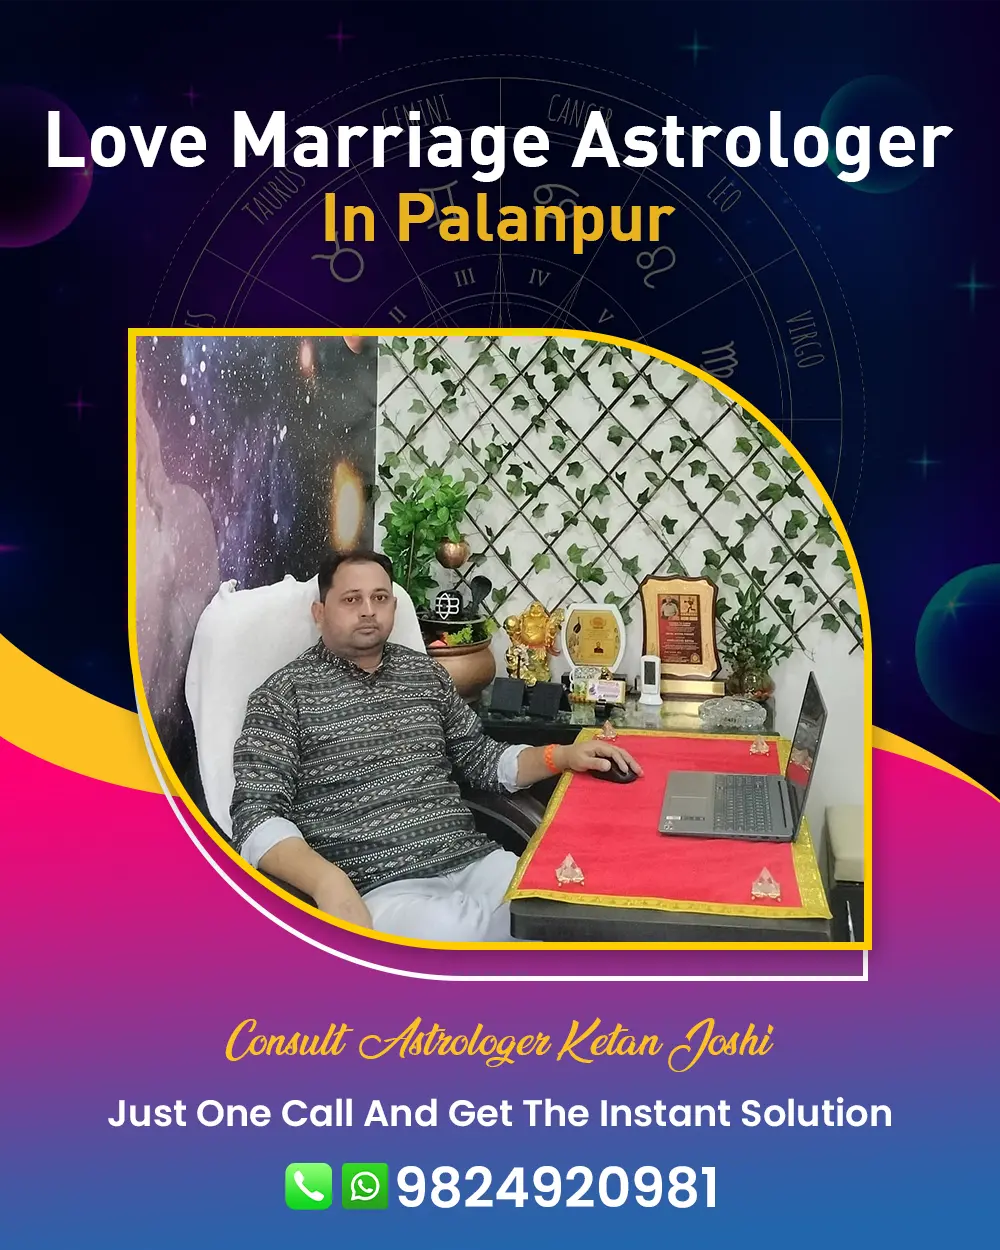 Love Marriage Astrologer In Palanpur